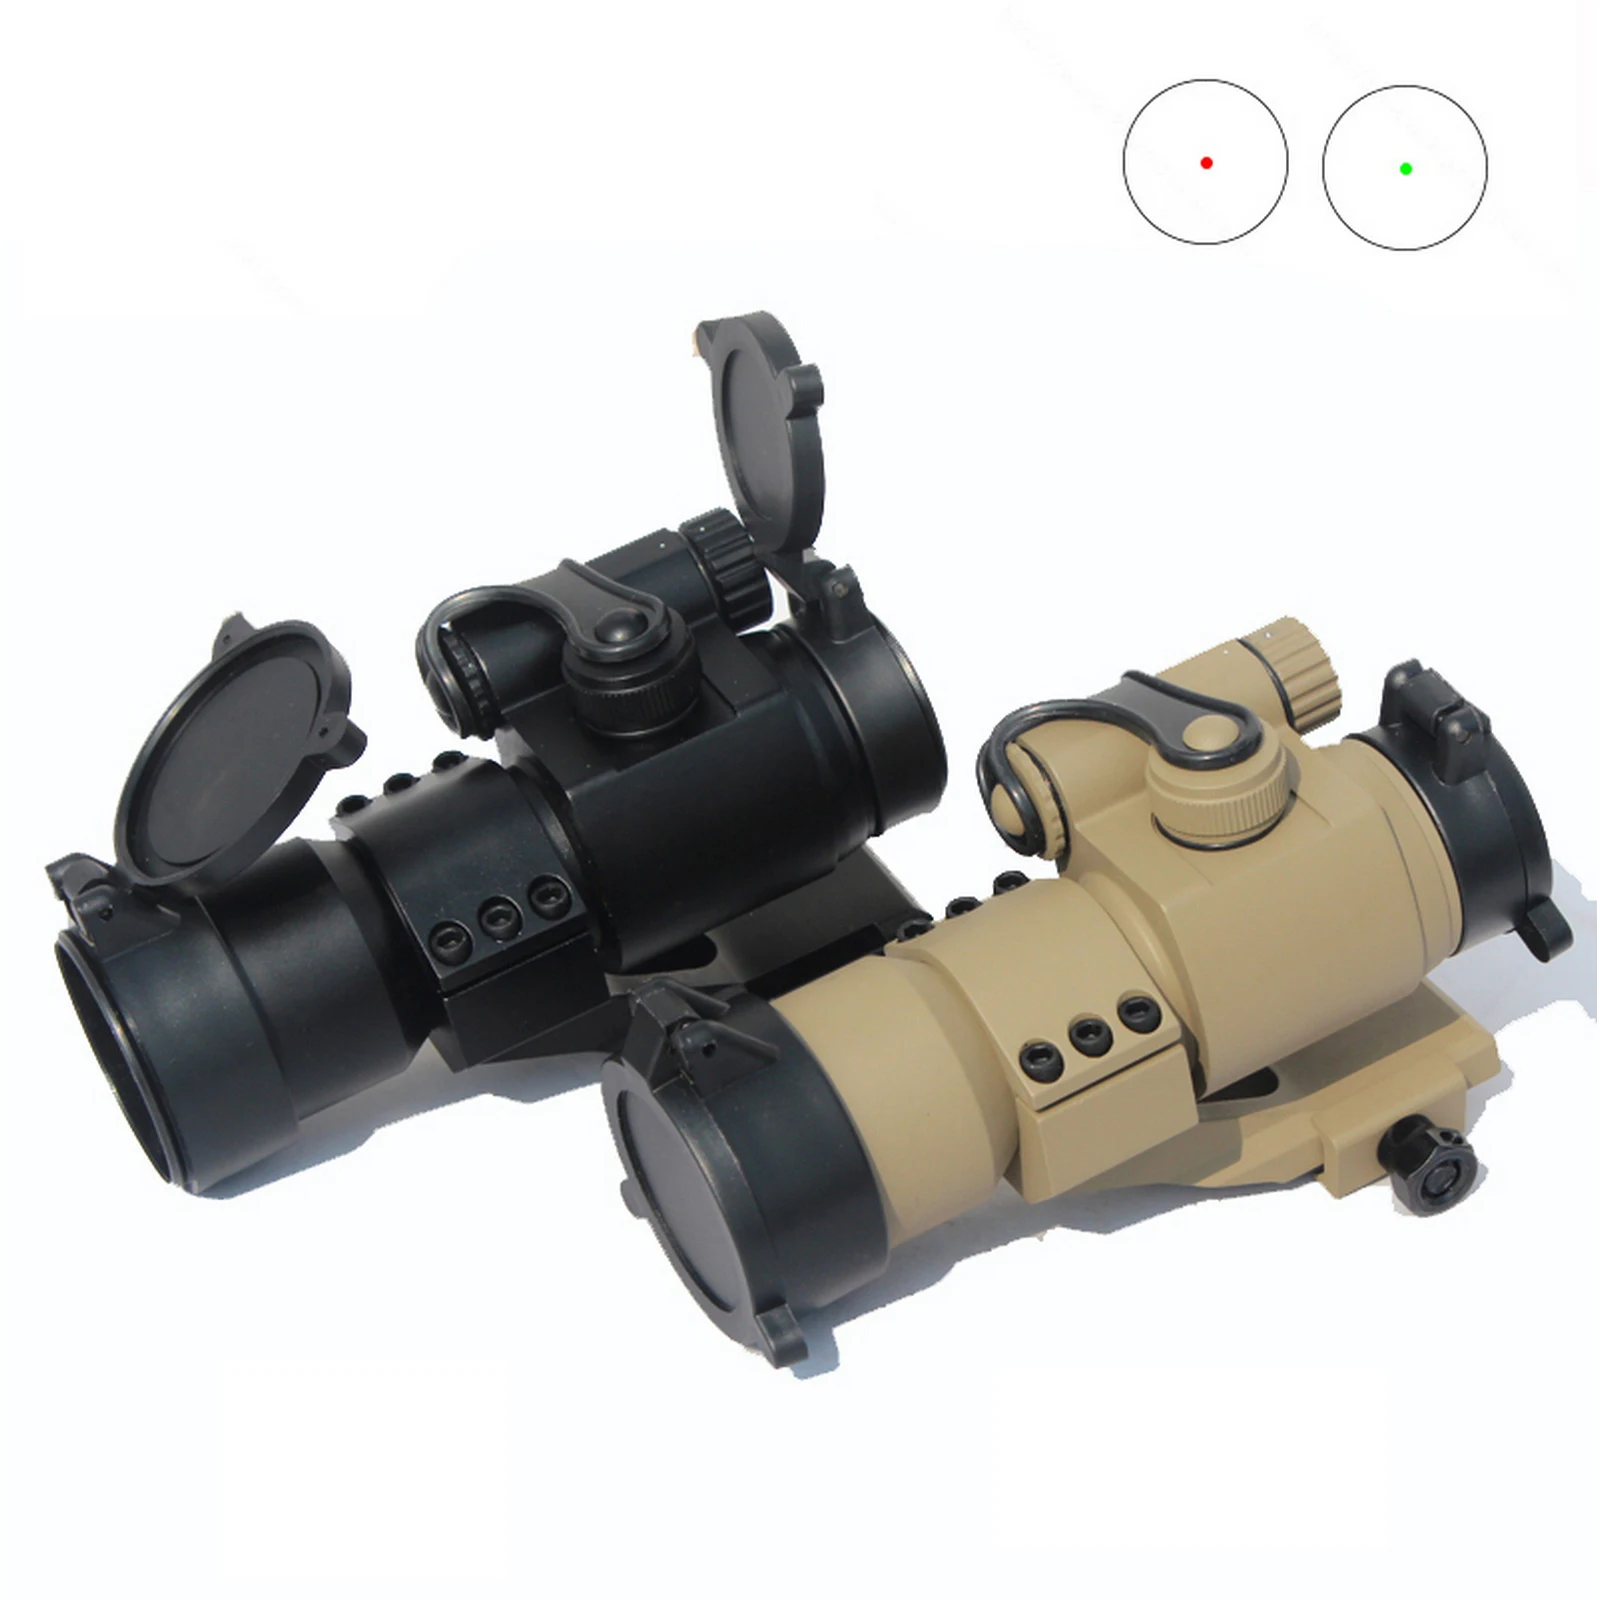 

Tactical M2 Red Dot Sight Collimator 32mm Holographic Reflex Rifle Scope for 20mm Picatinny Rail Mount Hunting Optic Riflescope